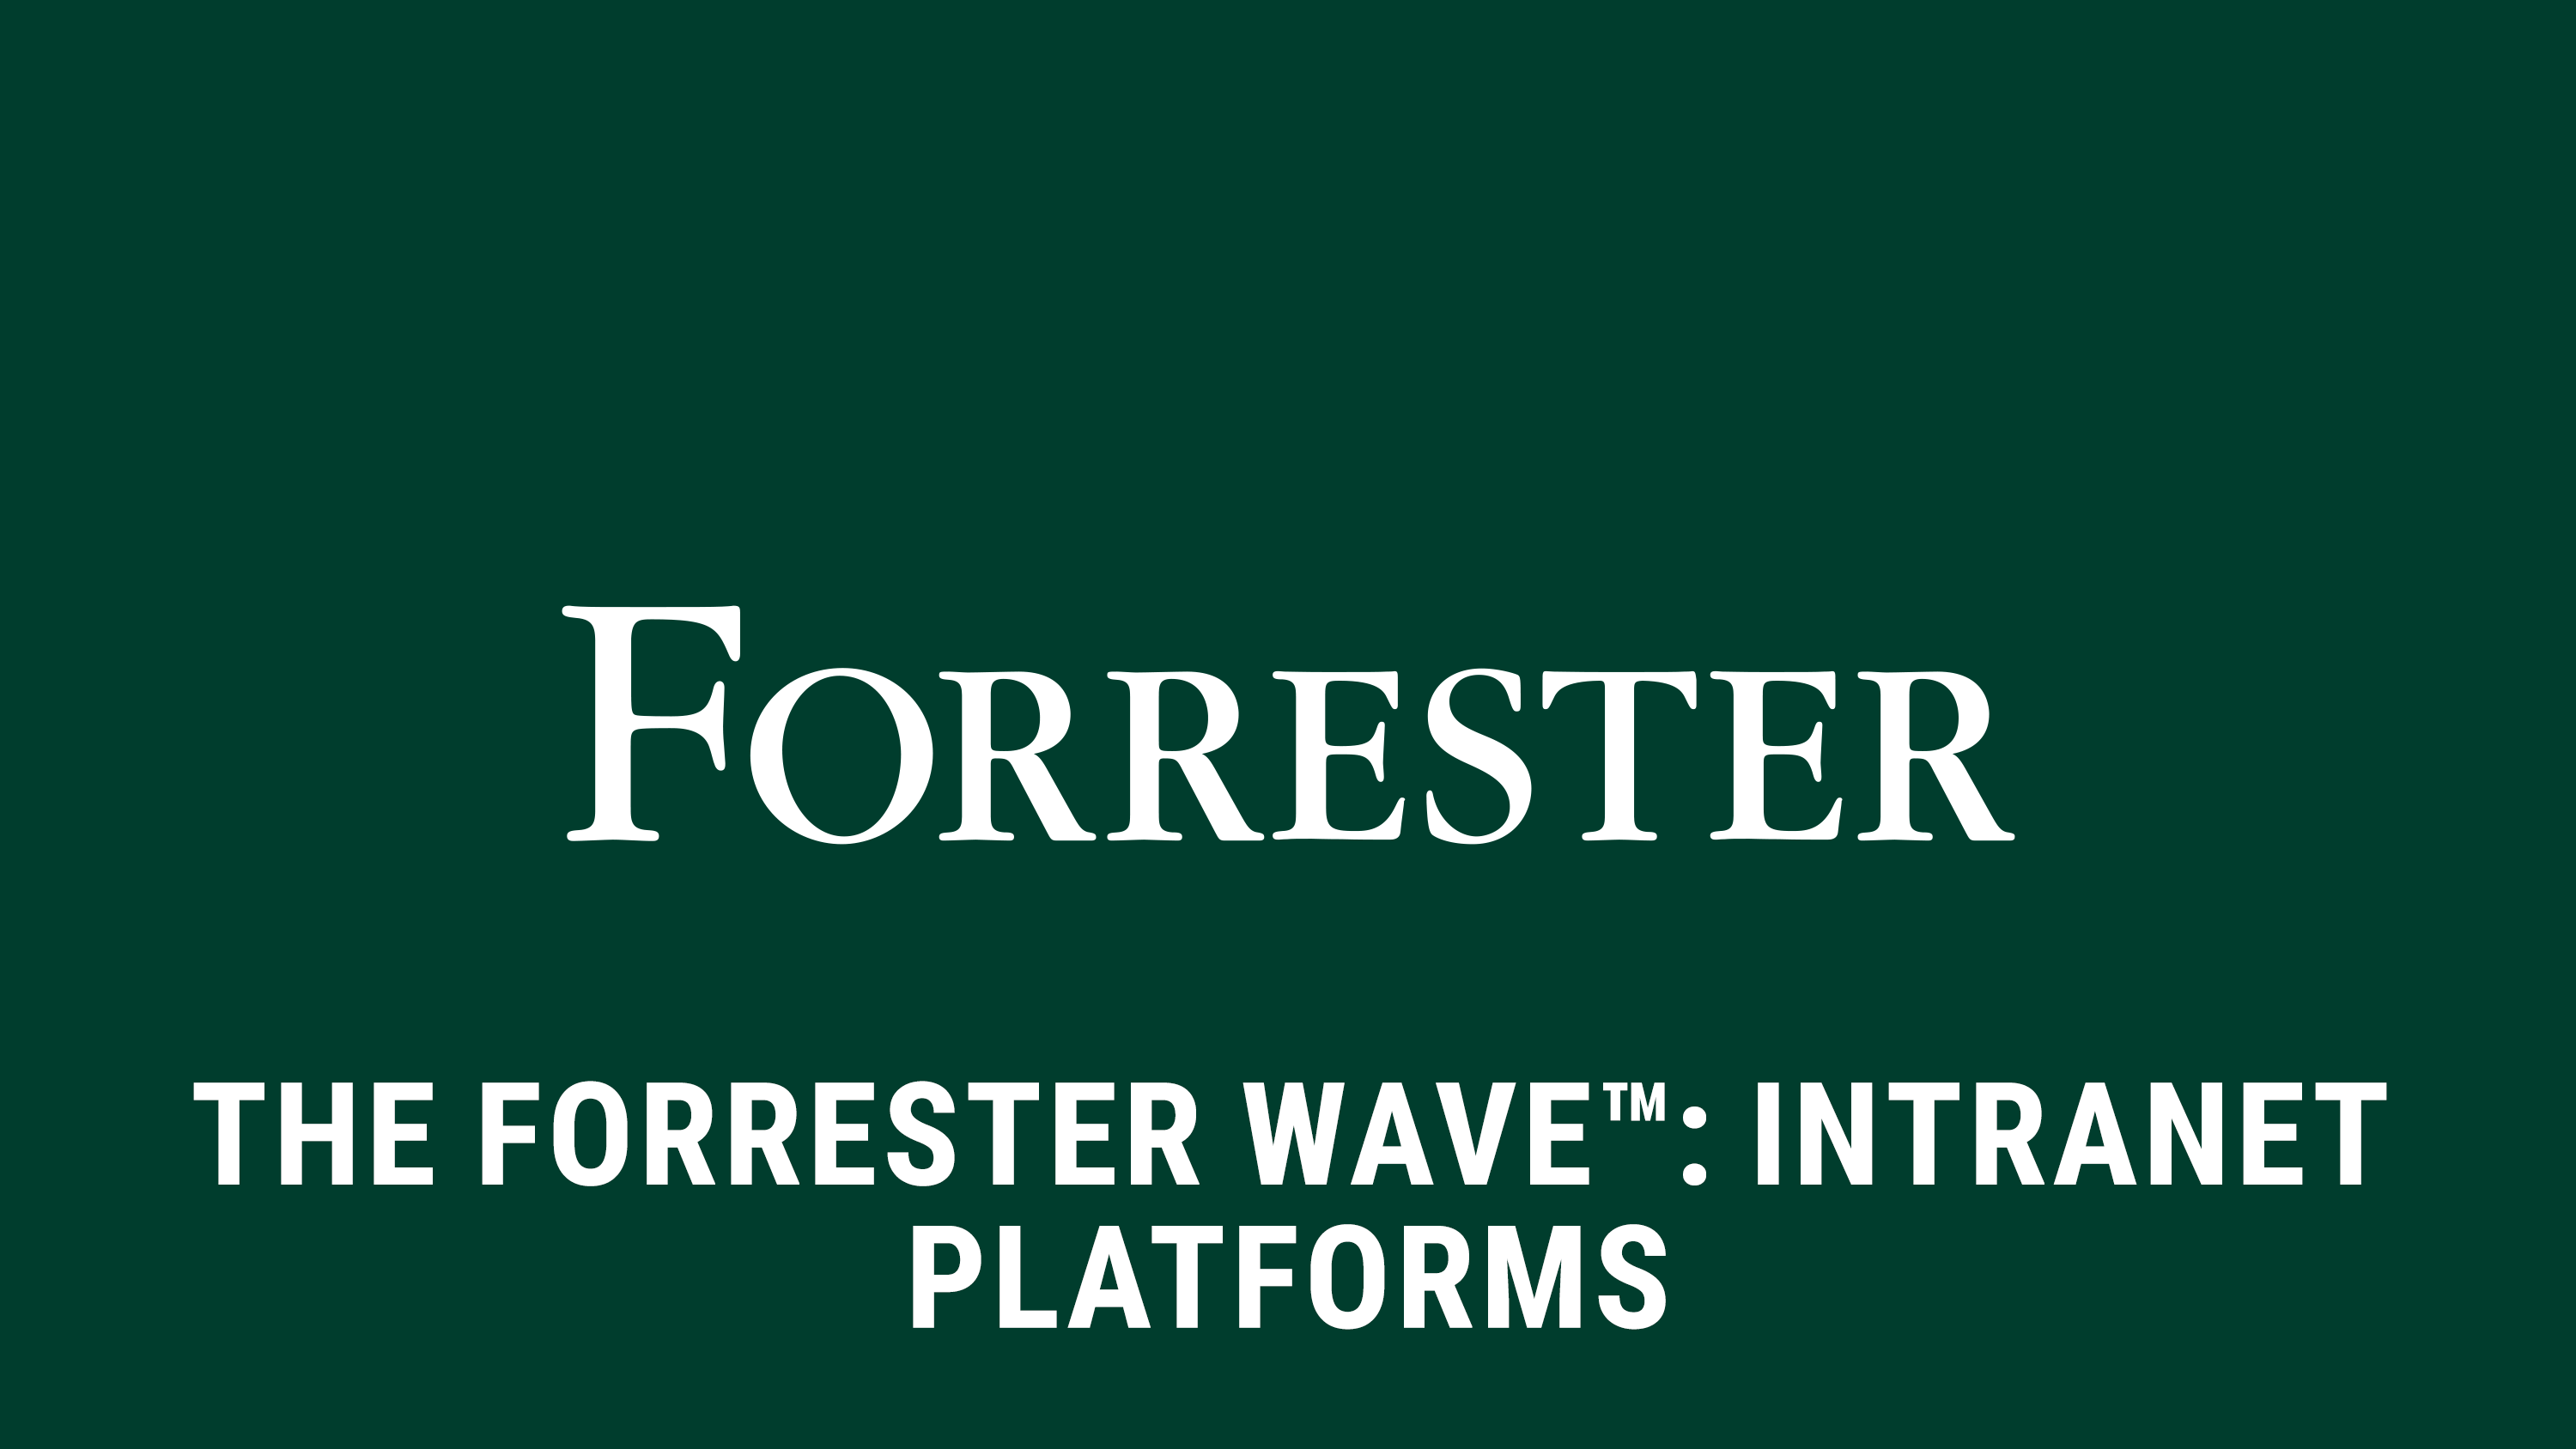 The Forrester Wave Software Composition Analysis 2021 Key Takeaways